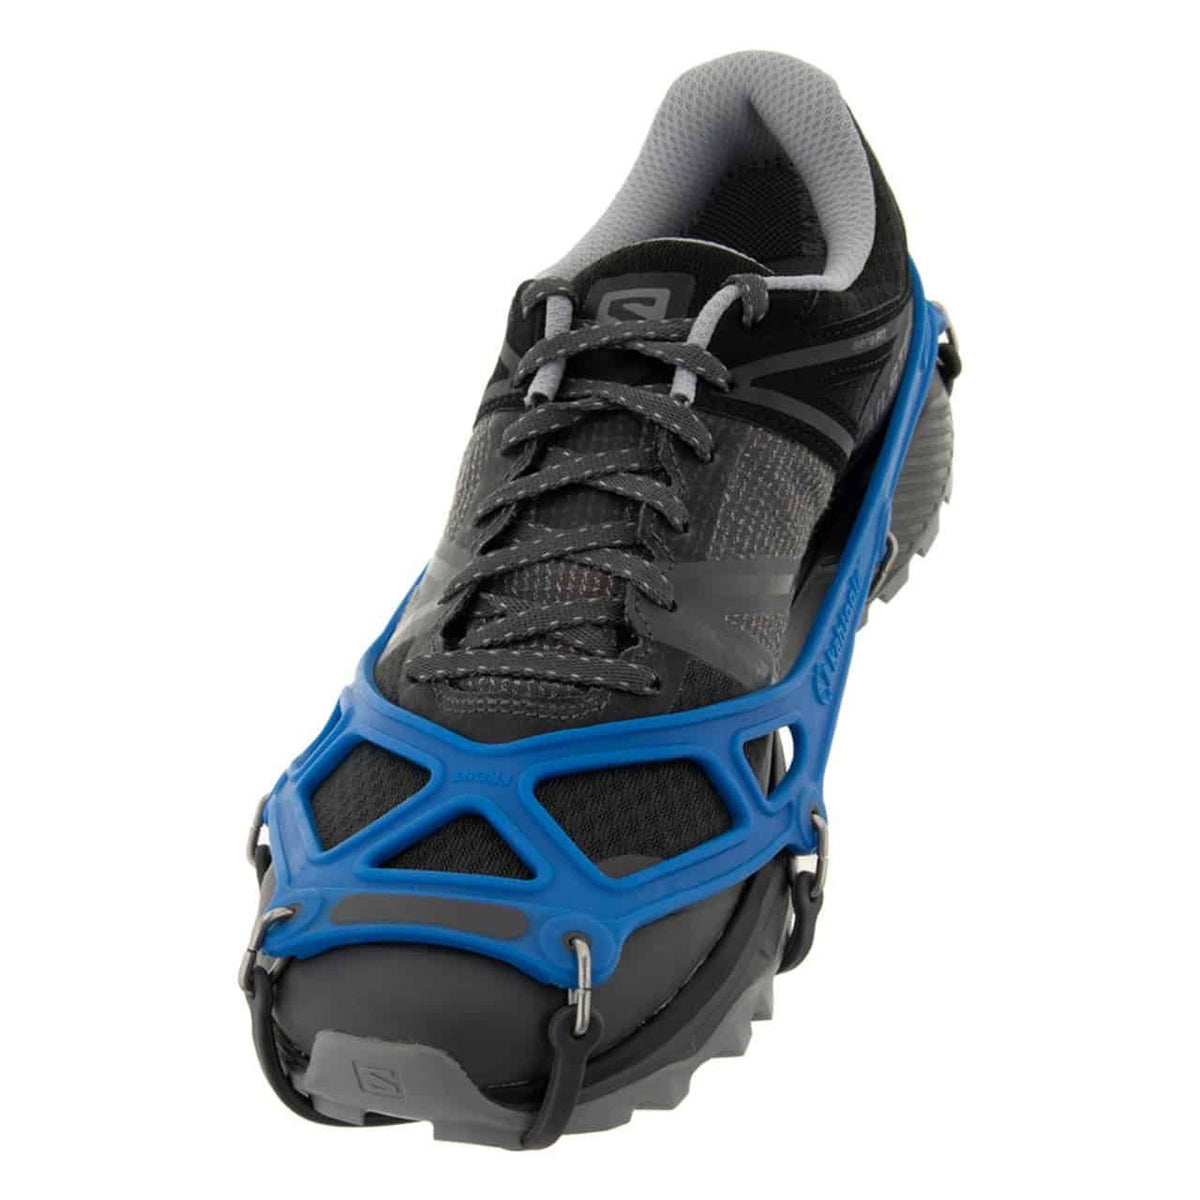 kahtoola Exospikes Blue Winter hiking traction spikes top